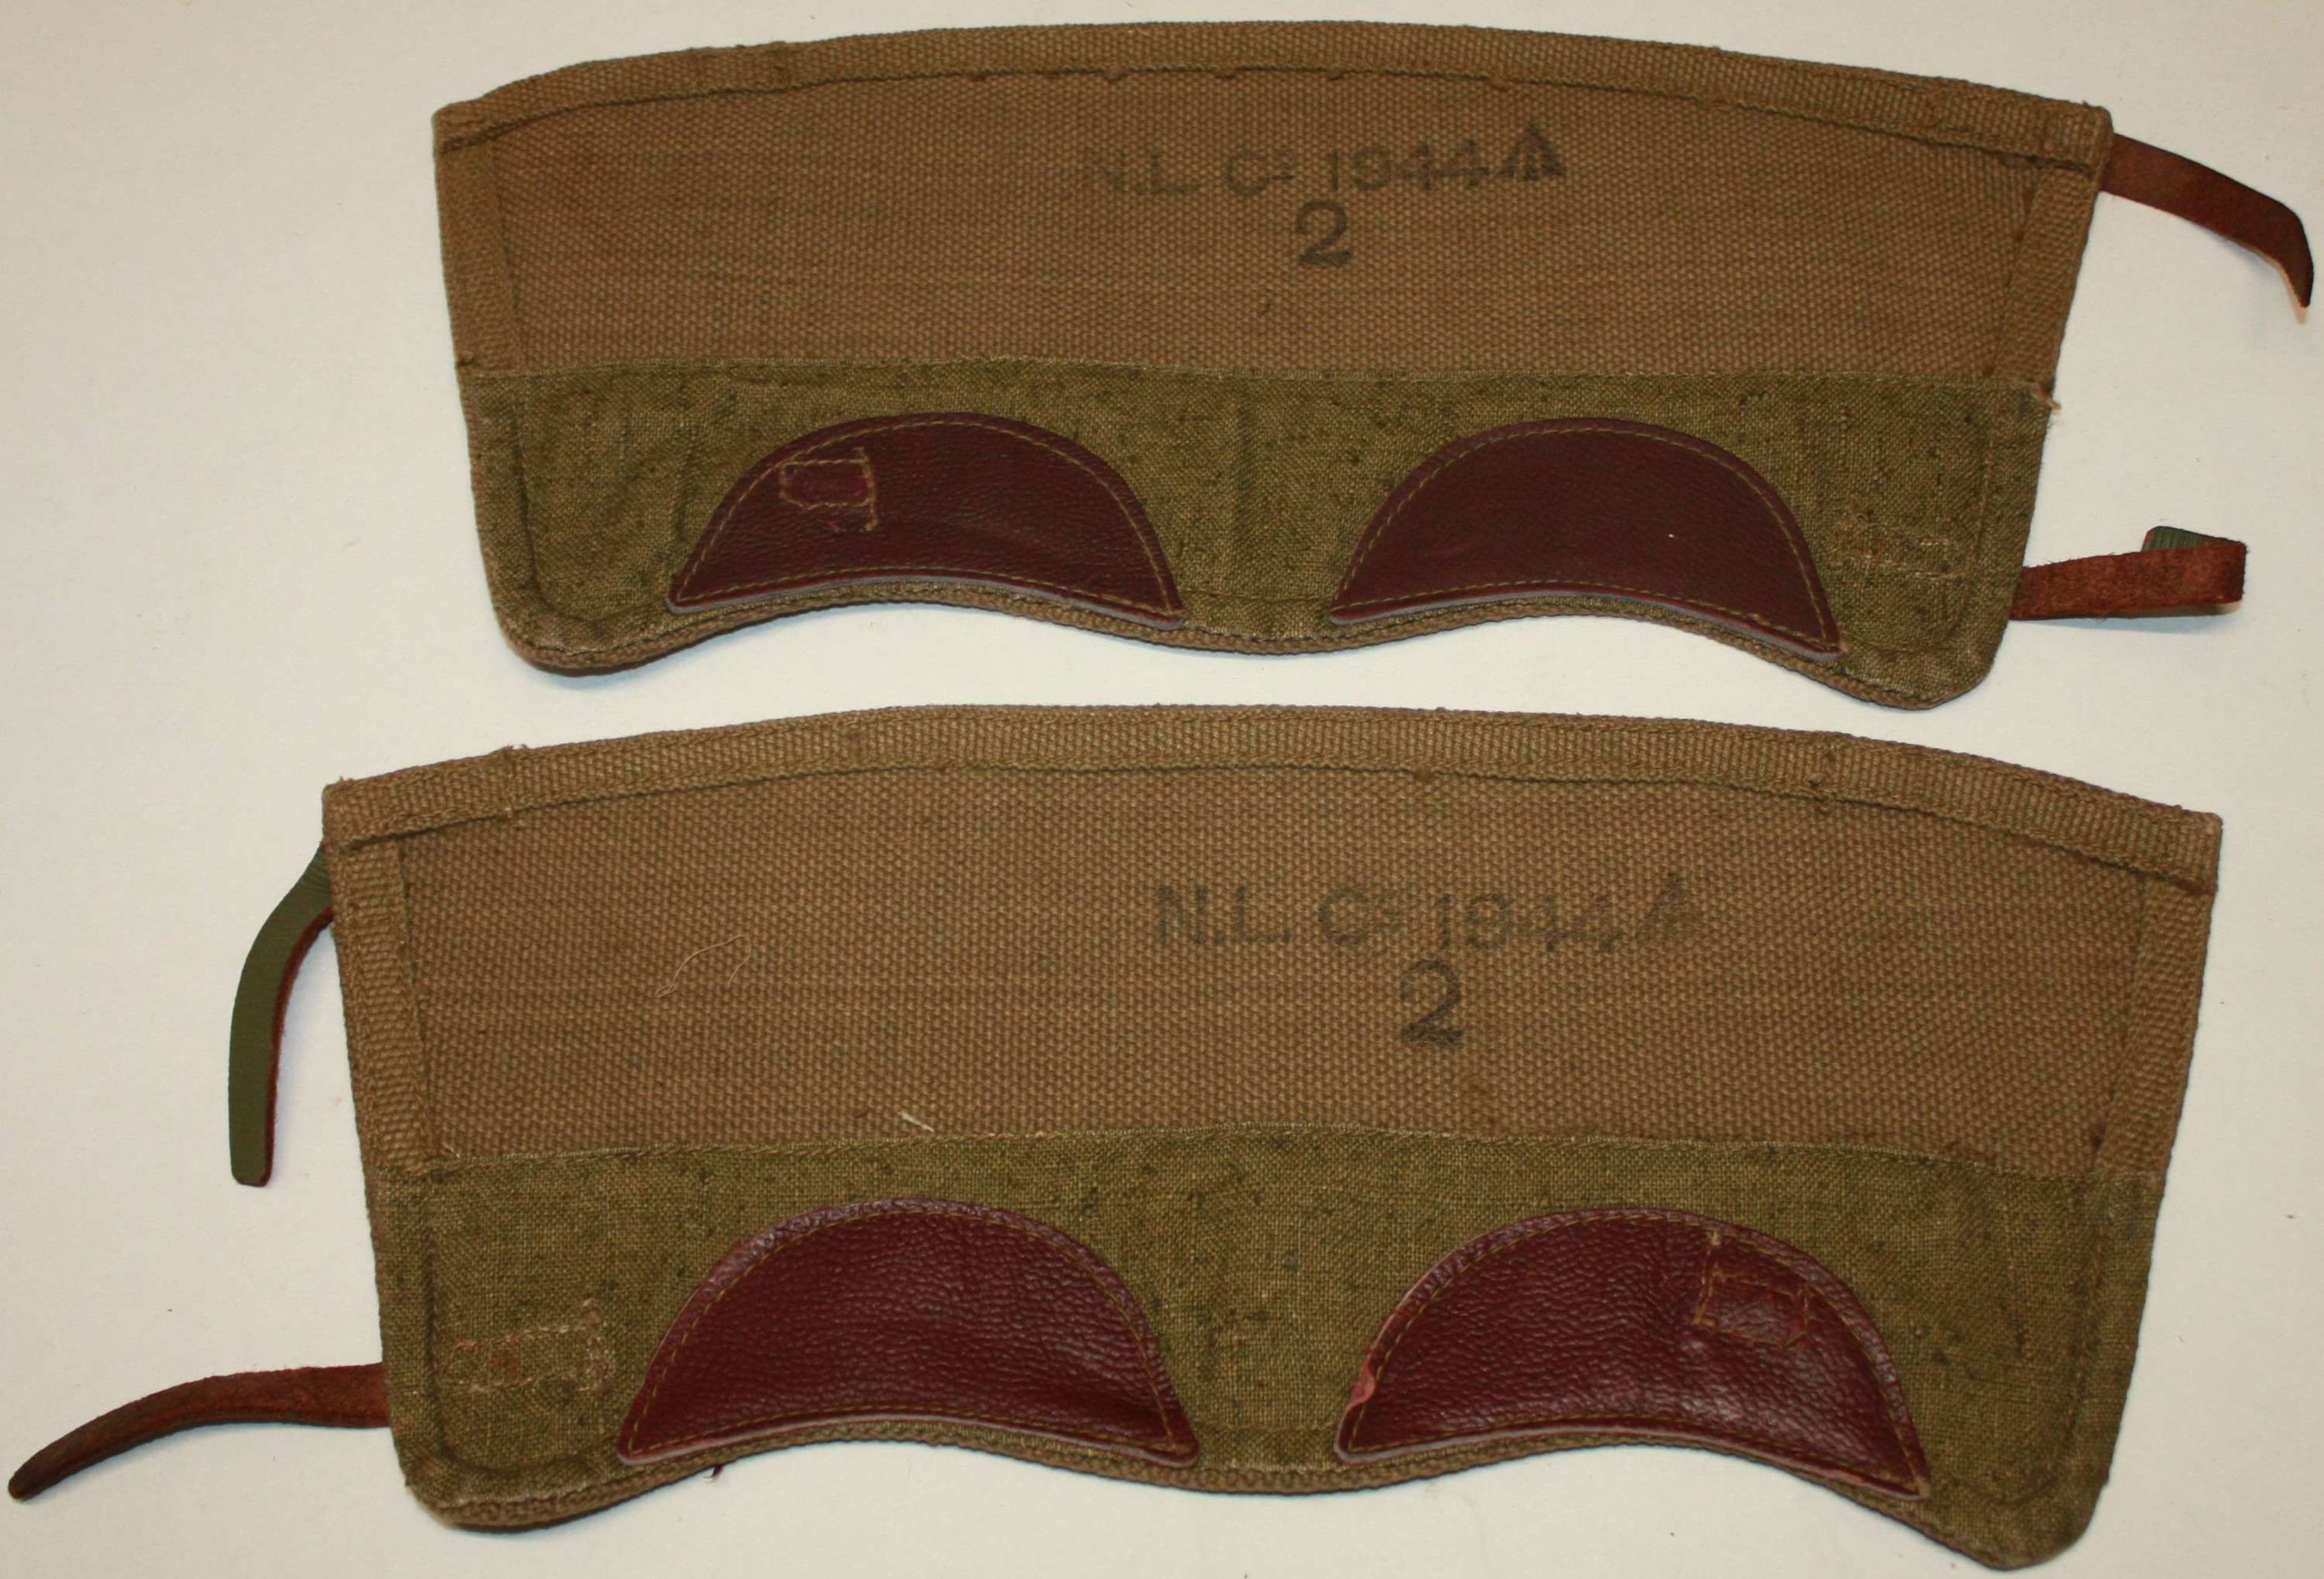 A GOOD CLEAN PAIR OF THE BRITISH WEBBING GATTERS 1944 DATED SIZE 2